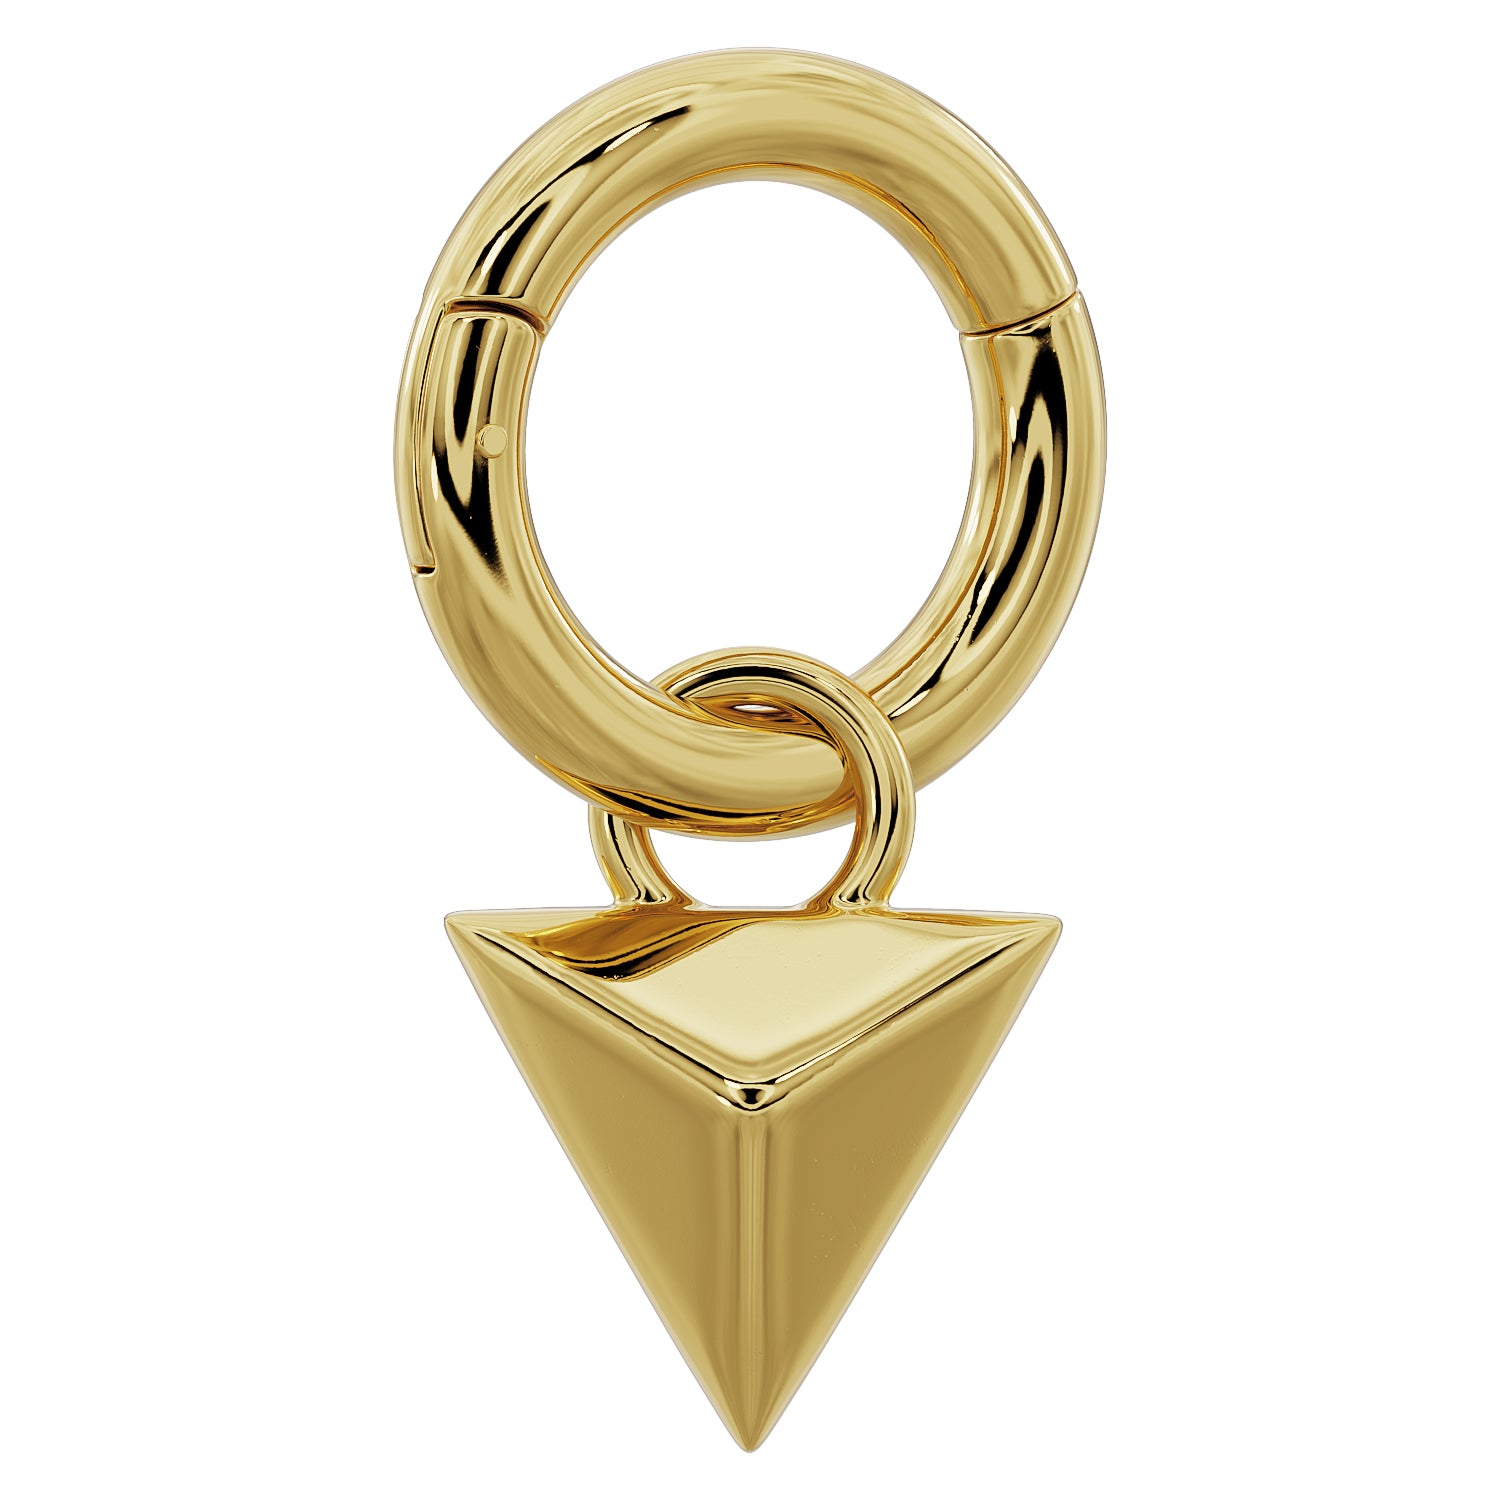 Clicker Ring & Gold Pyramid Charm Accessory for Piercing Jewelry